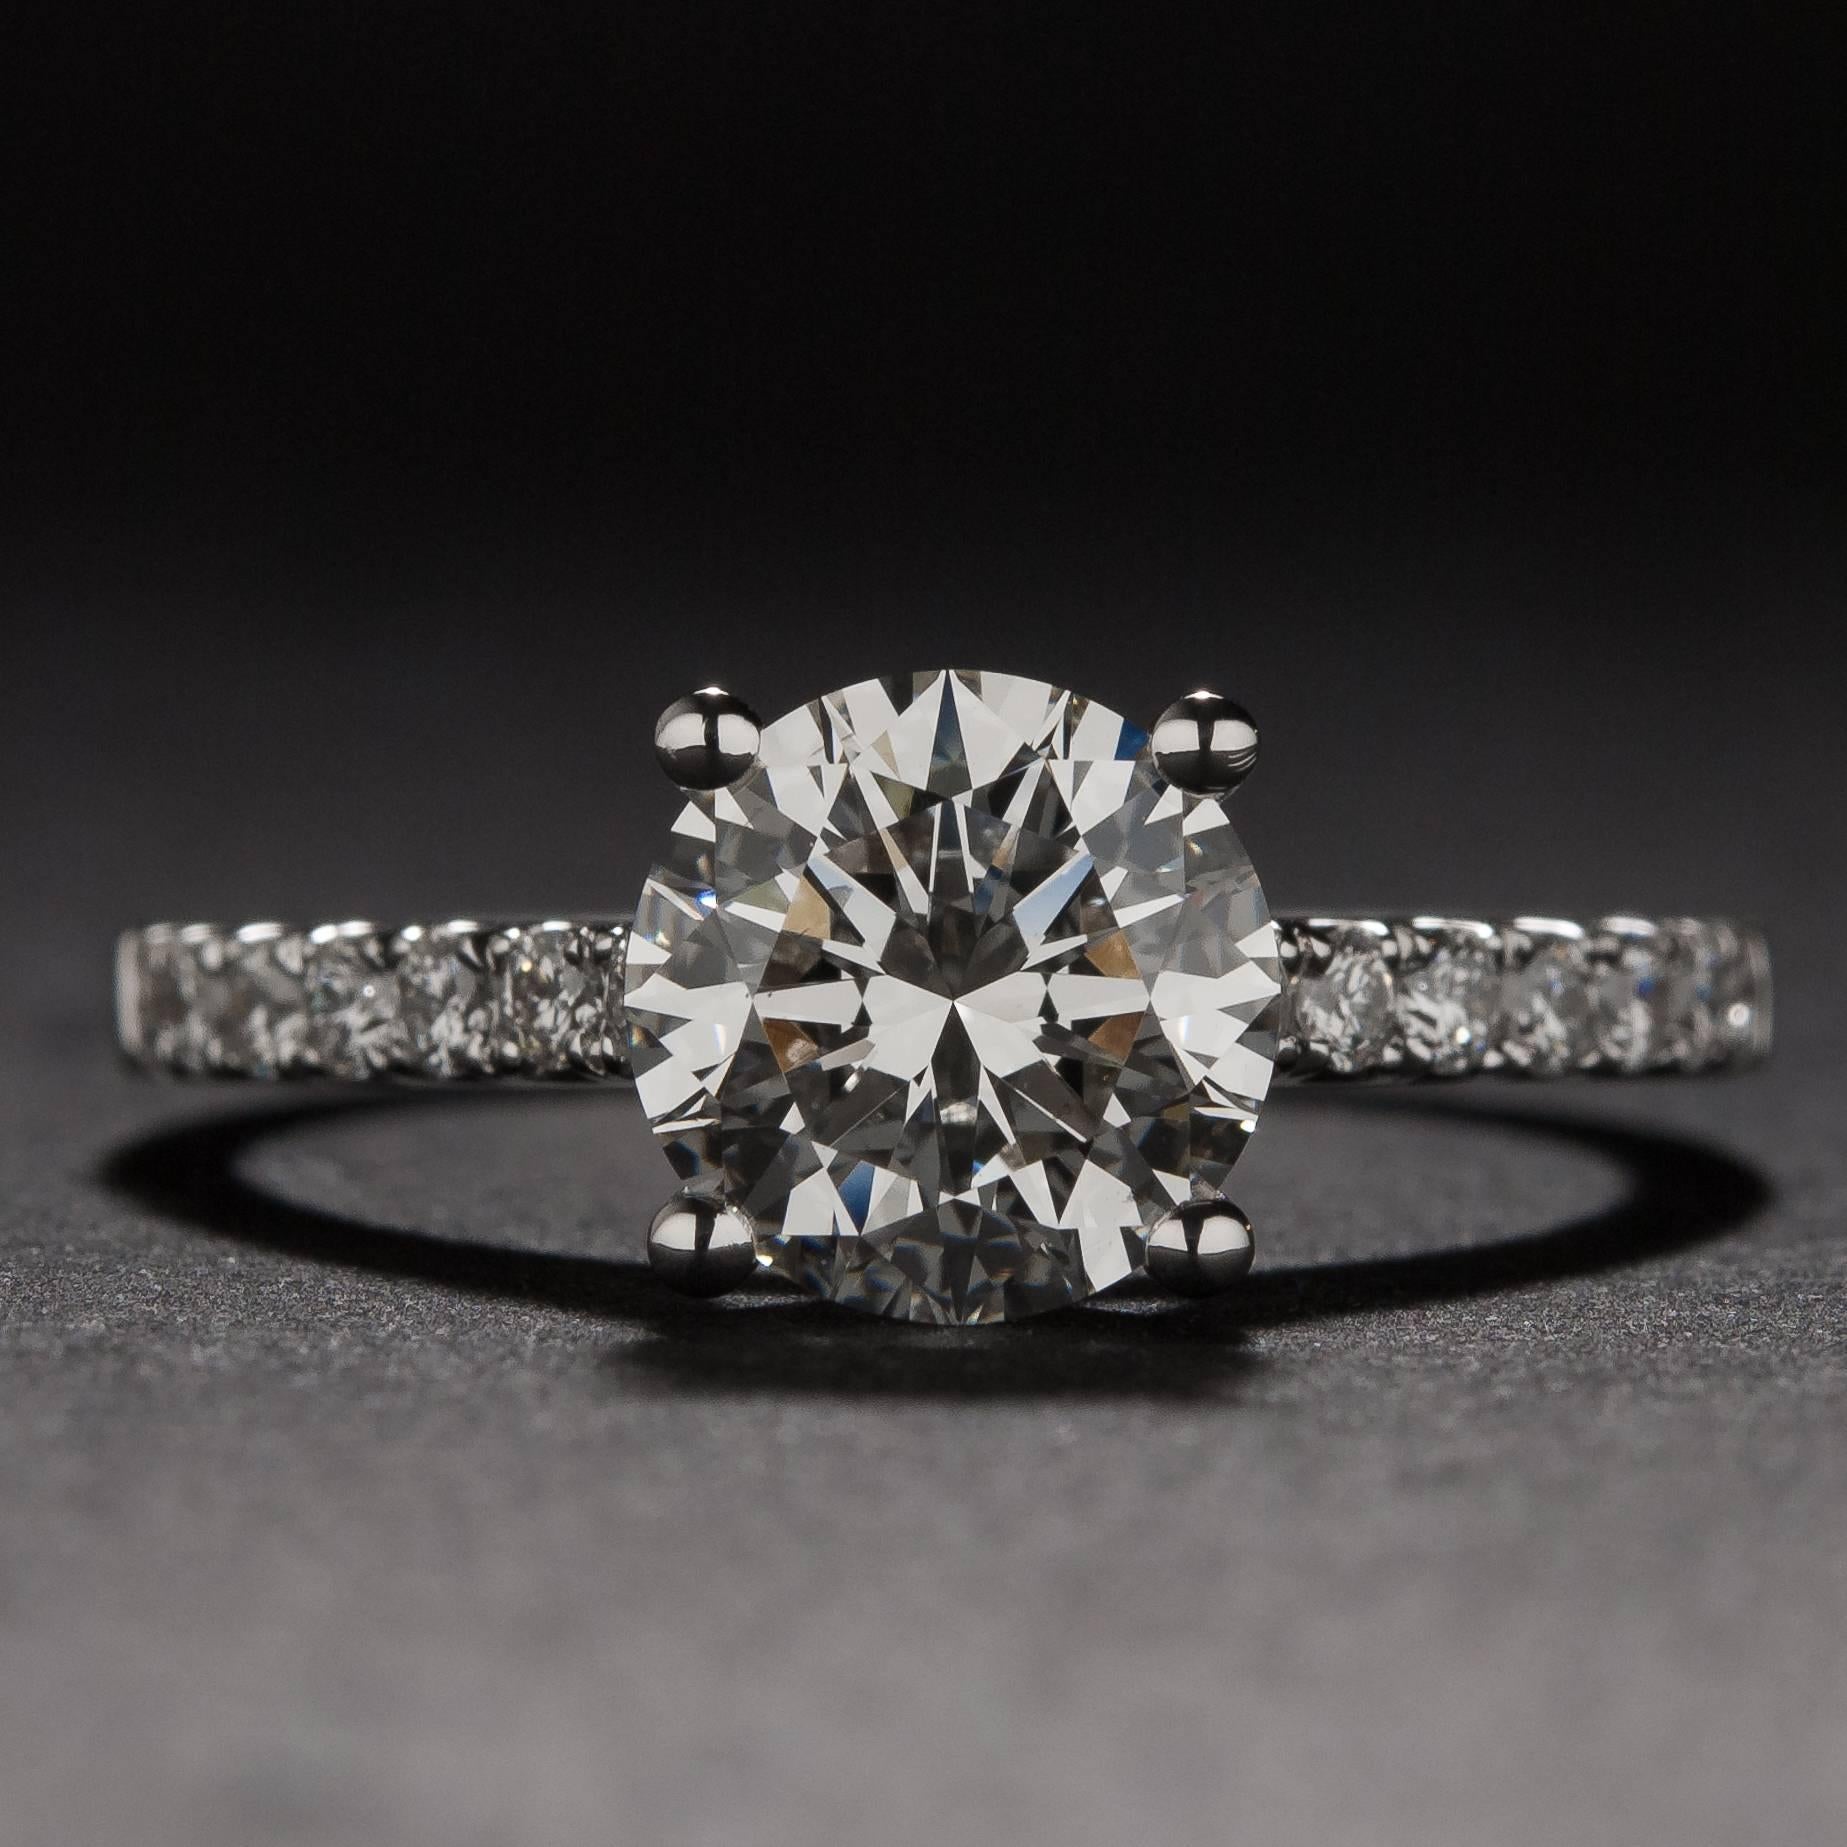 This stunning ring features a 1.51 carat GIA certified center diamond (G color, VS1 clarity) as well as 14 side diamonds weighing a total of .36 carats. The mounting is crafted in 18k white gold and the ring is currently size 6.5.